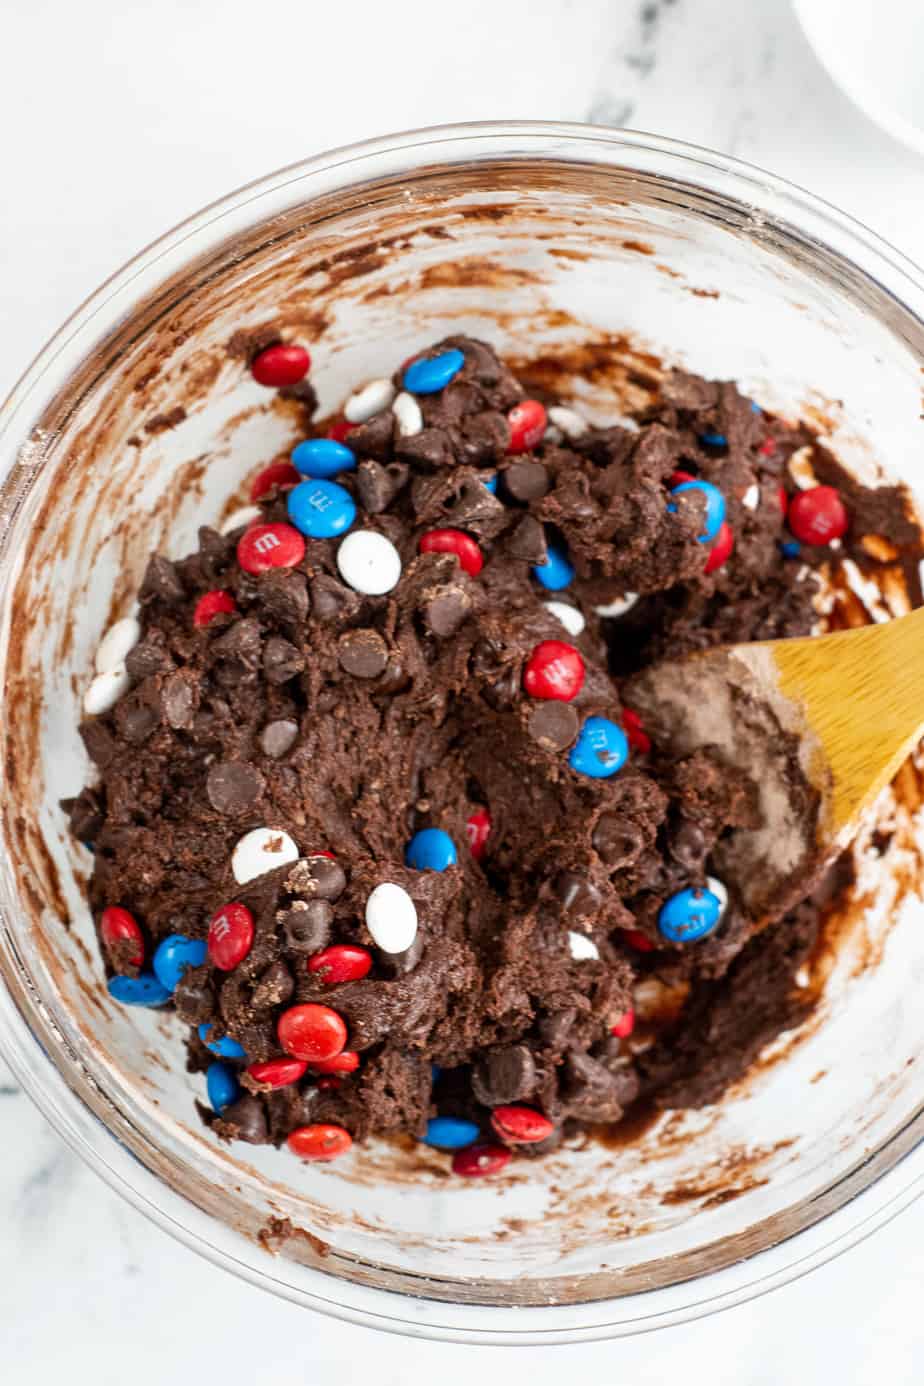 Folding red white and blue MMs into brownie cookie dough in a bowl from overhead with a wooden spoon.